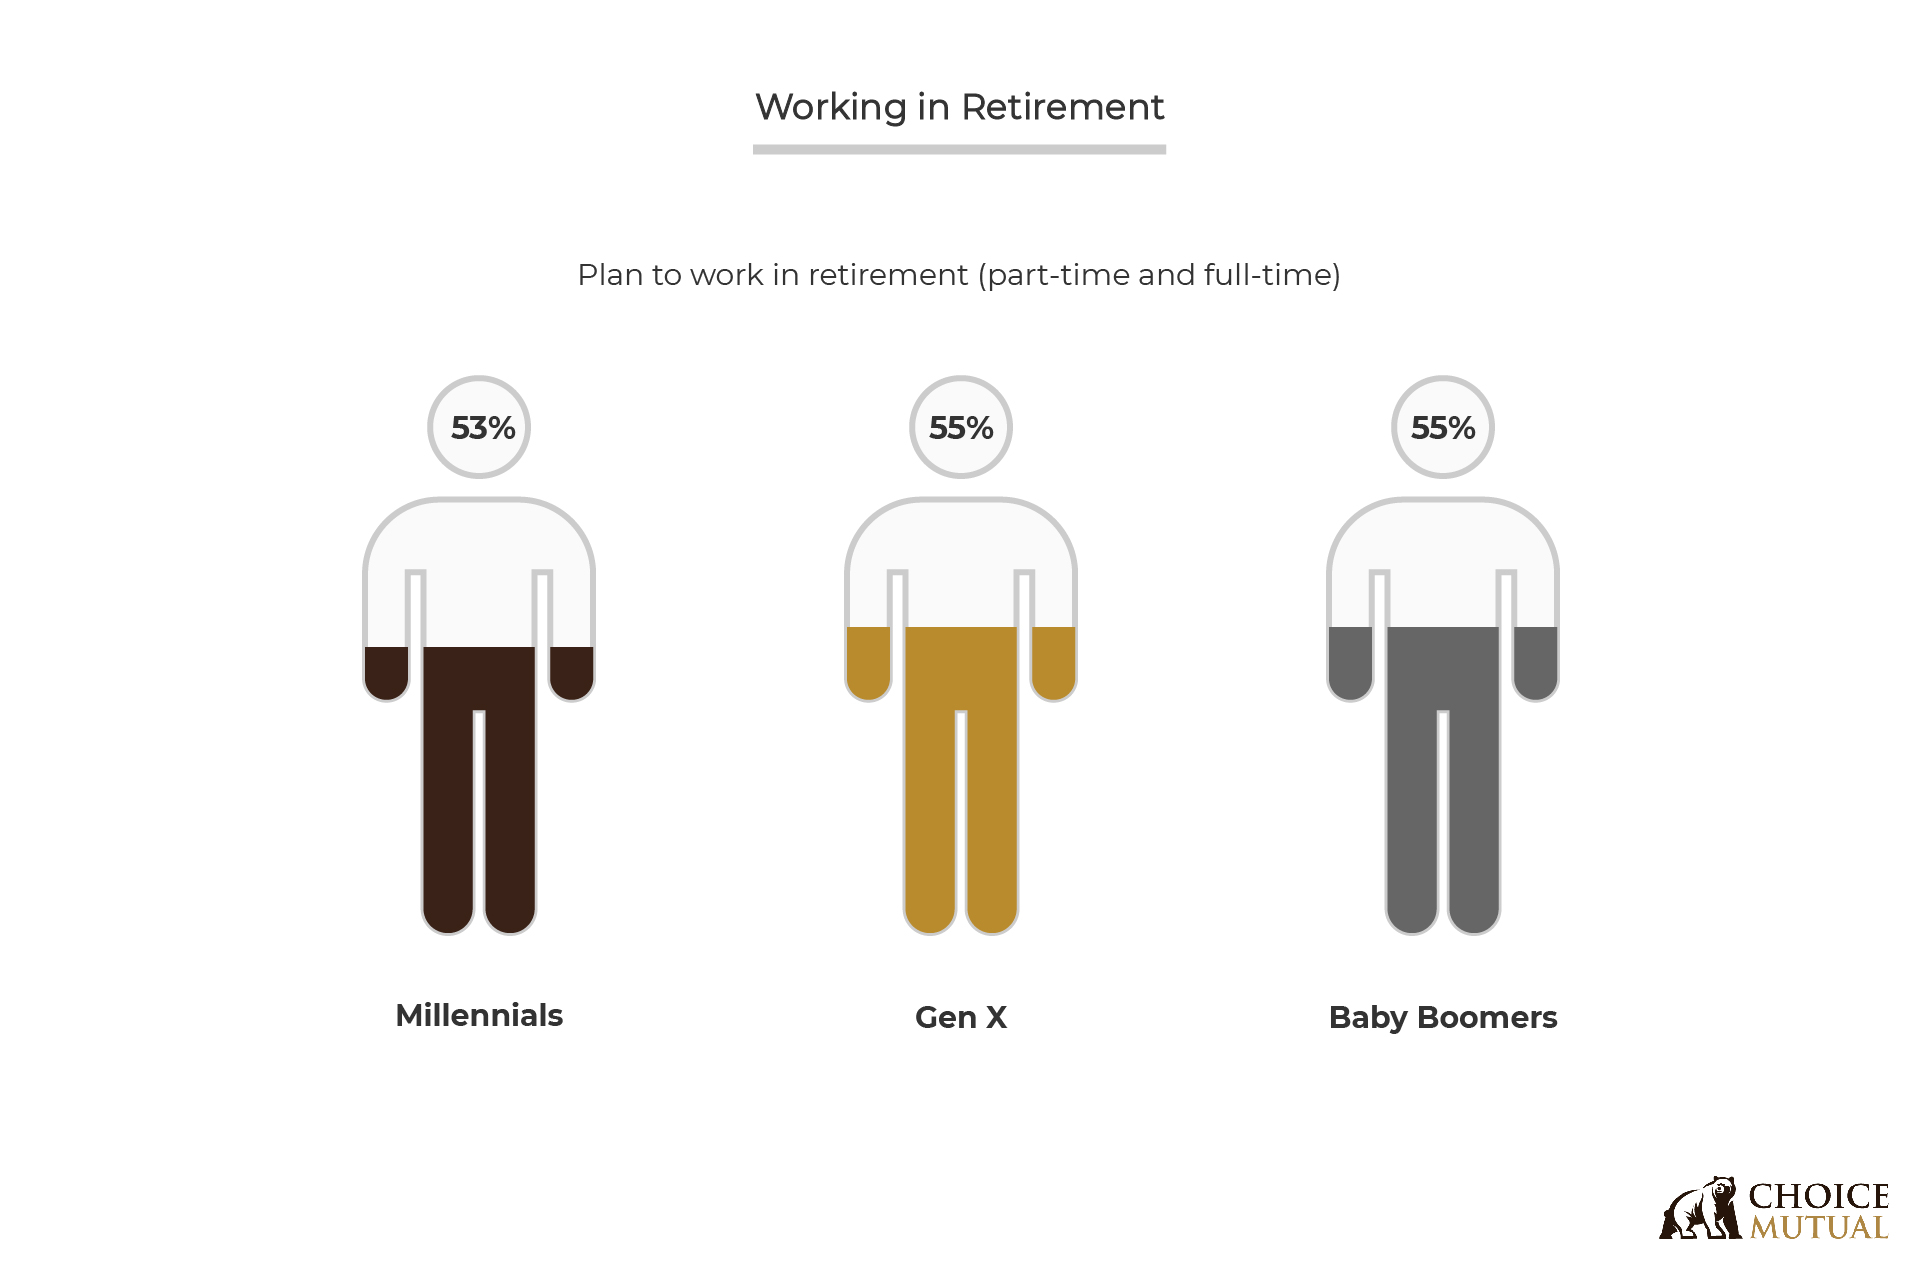 A picture showing what percentage of each generation plan to work part time in retirement